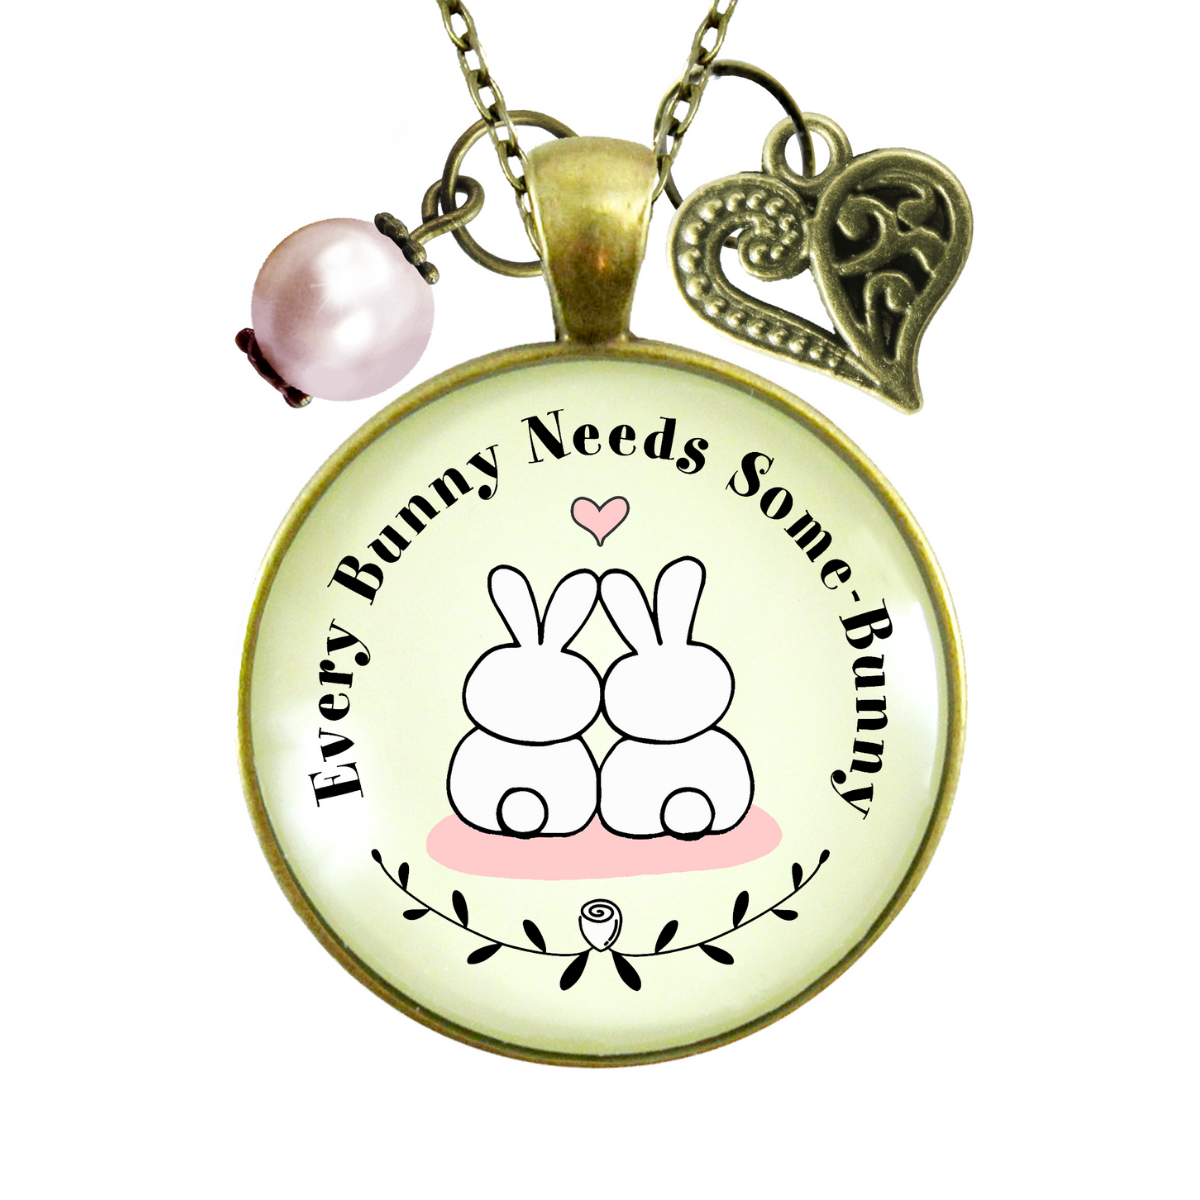 Every Bunny Needs Some Bunny Spring Jewelry Love Necklace Pink Bead - Gutsy Goodness